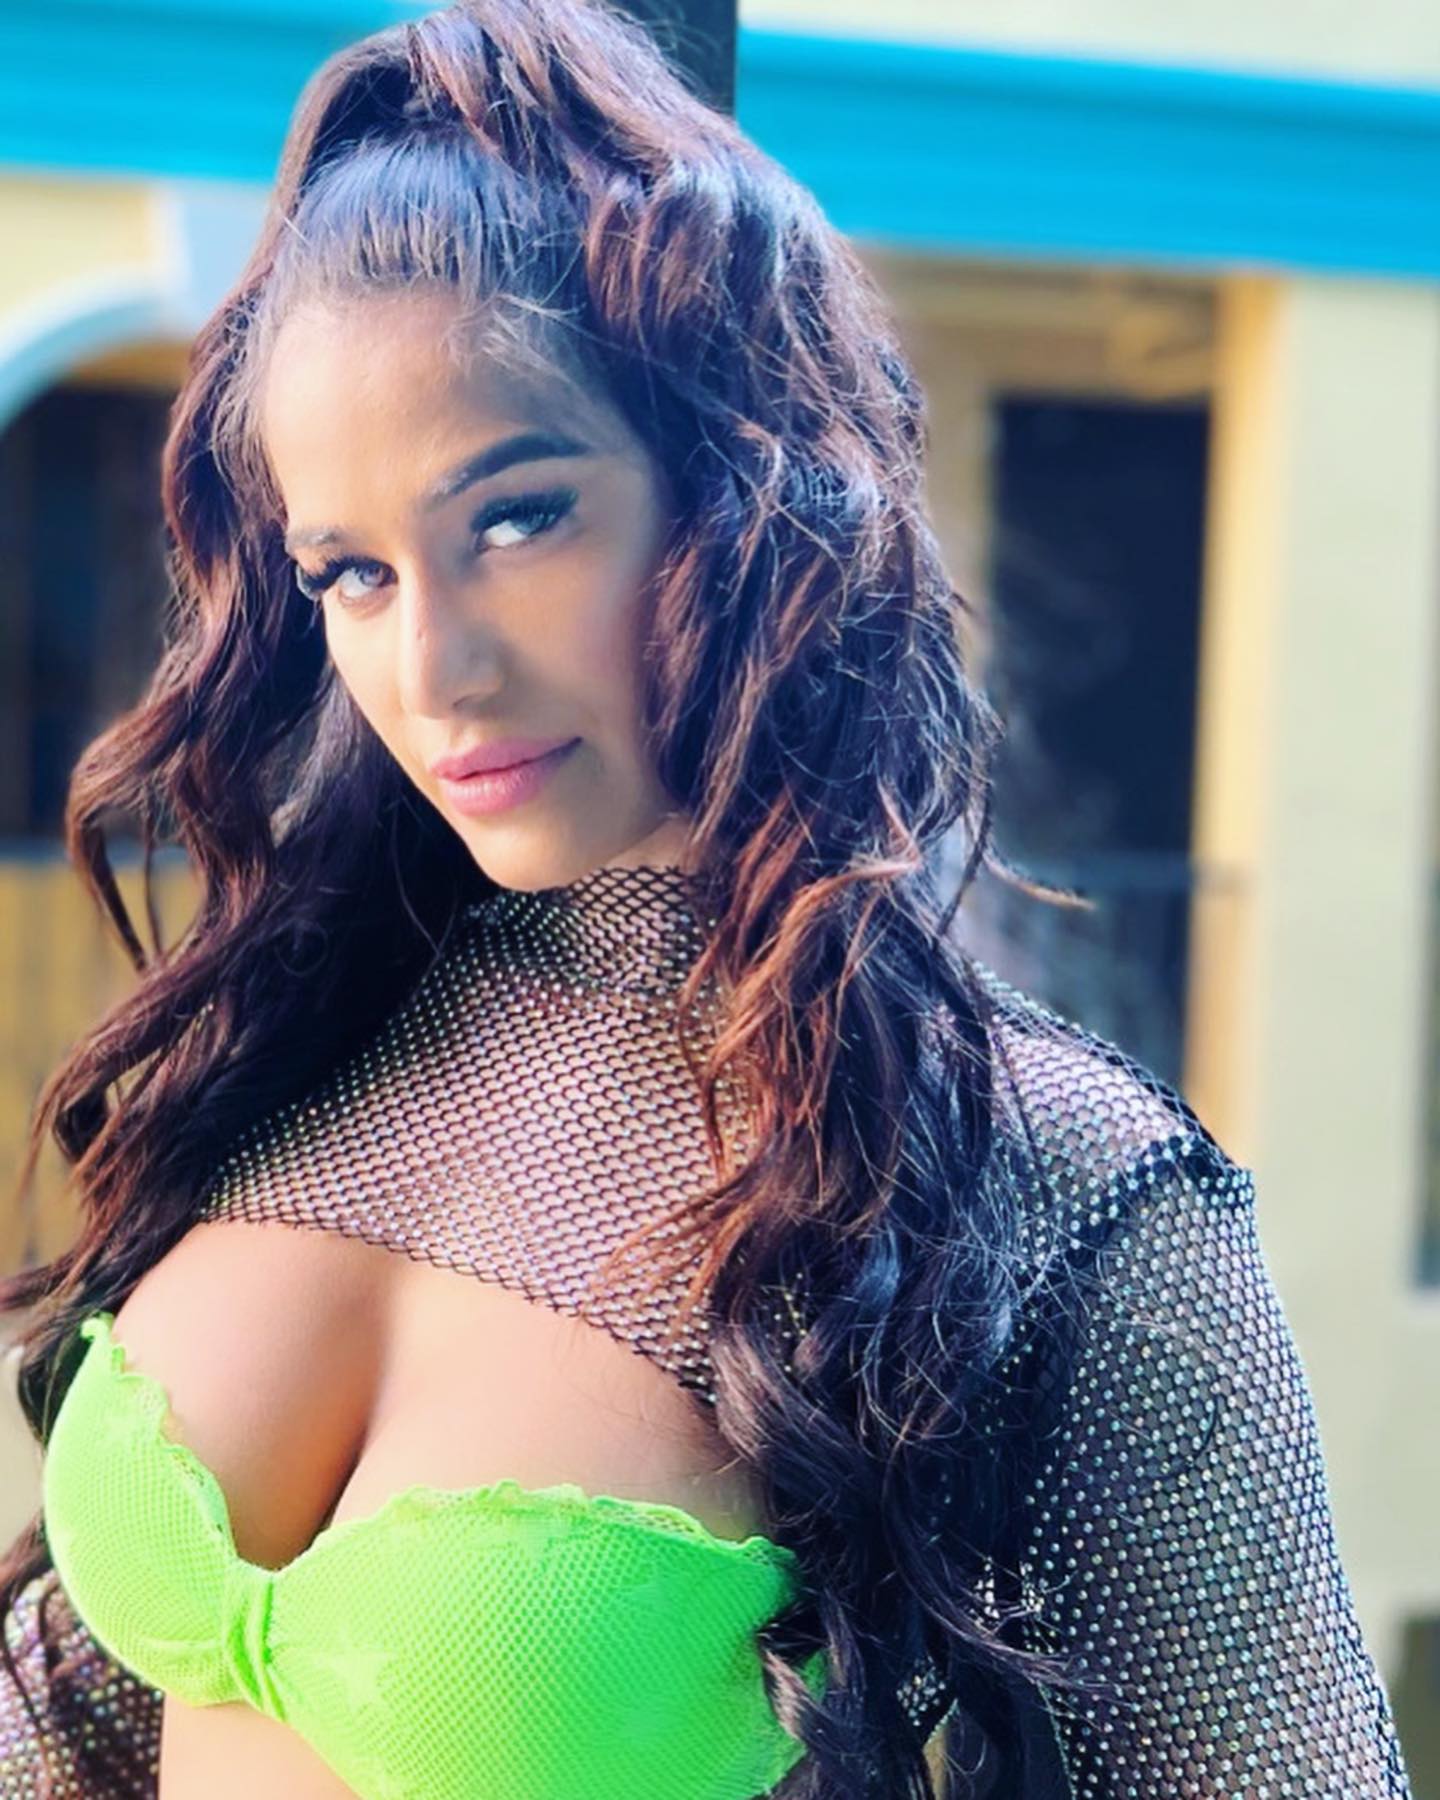 Photo by Poonam Pandey on June 19 2023. May be an image of 1 person long hair makeup and fishnet stockings